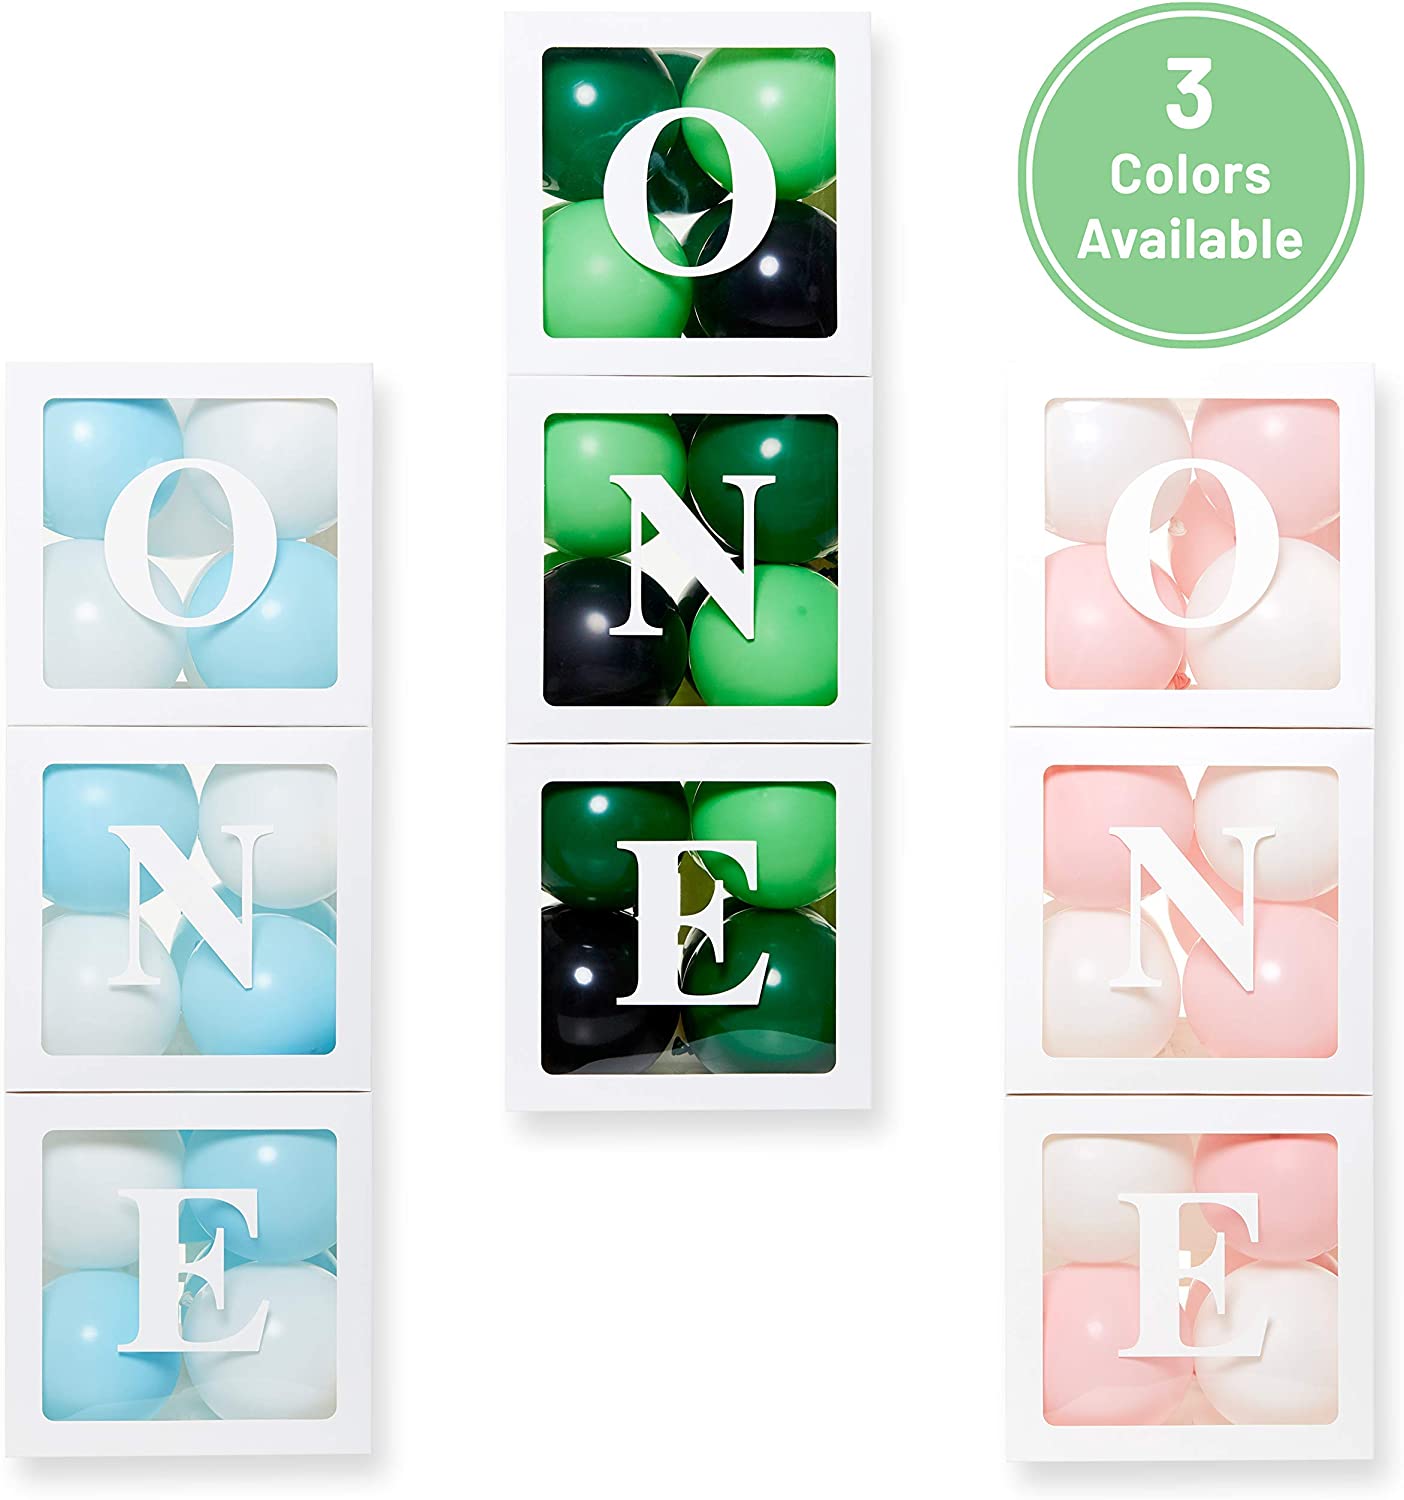 1st Birthday Balloon 'ONE' Boxes for 1 Year Old WITH 24 Balloons - Baby  first Birthday Decorations Clear Cube Blocks 'ONE' Letters as Cake Smash  Photoshoot Props in Safari/Jungle Wild One Green